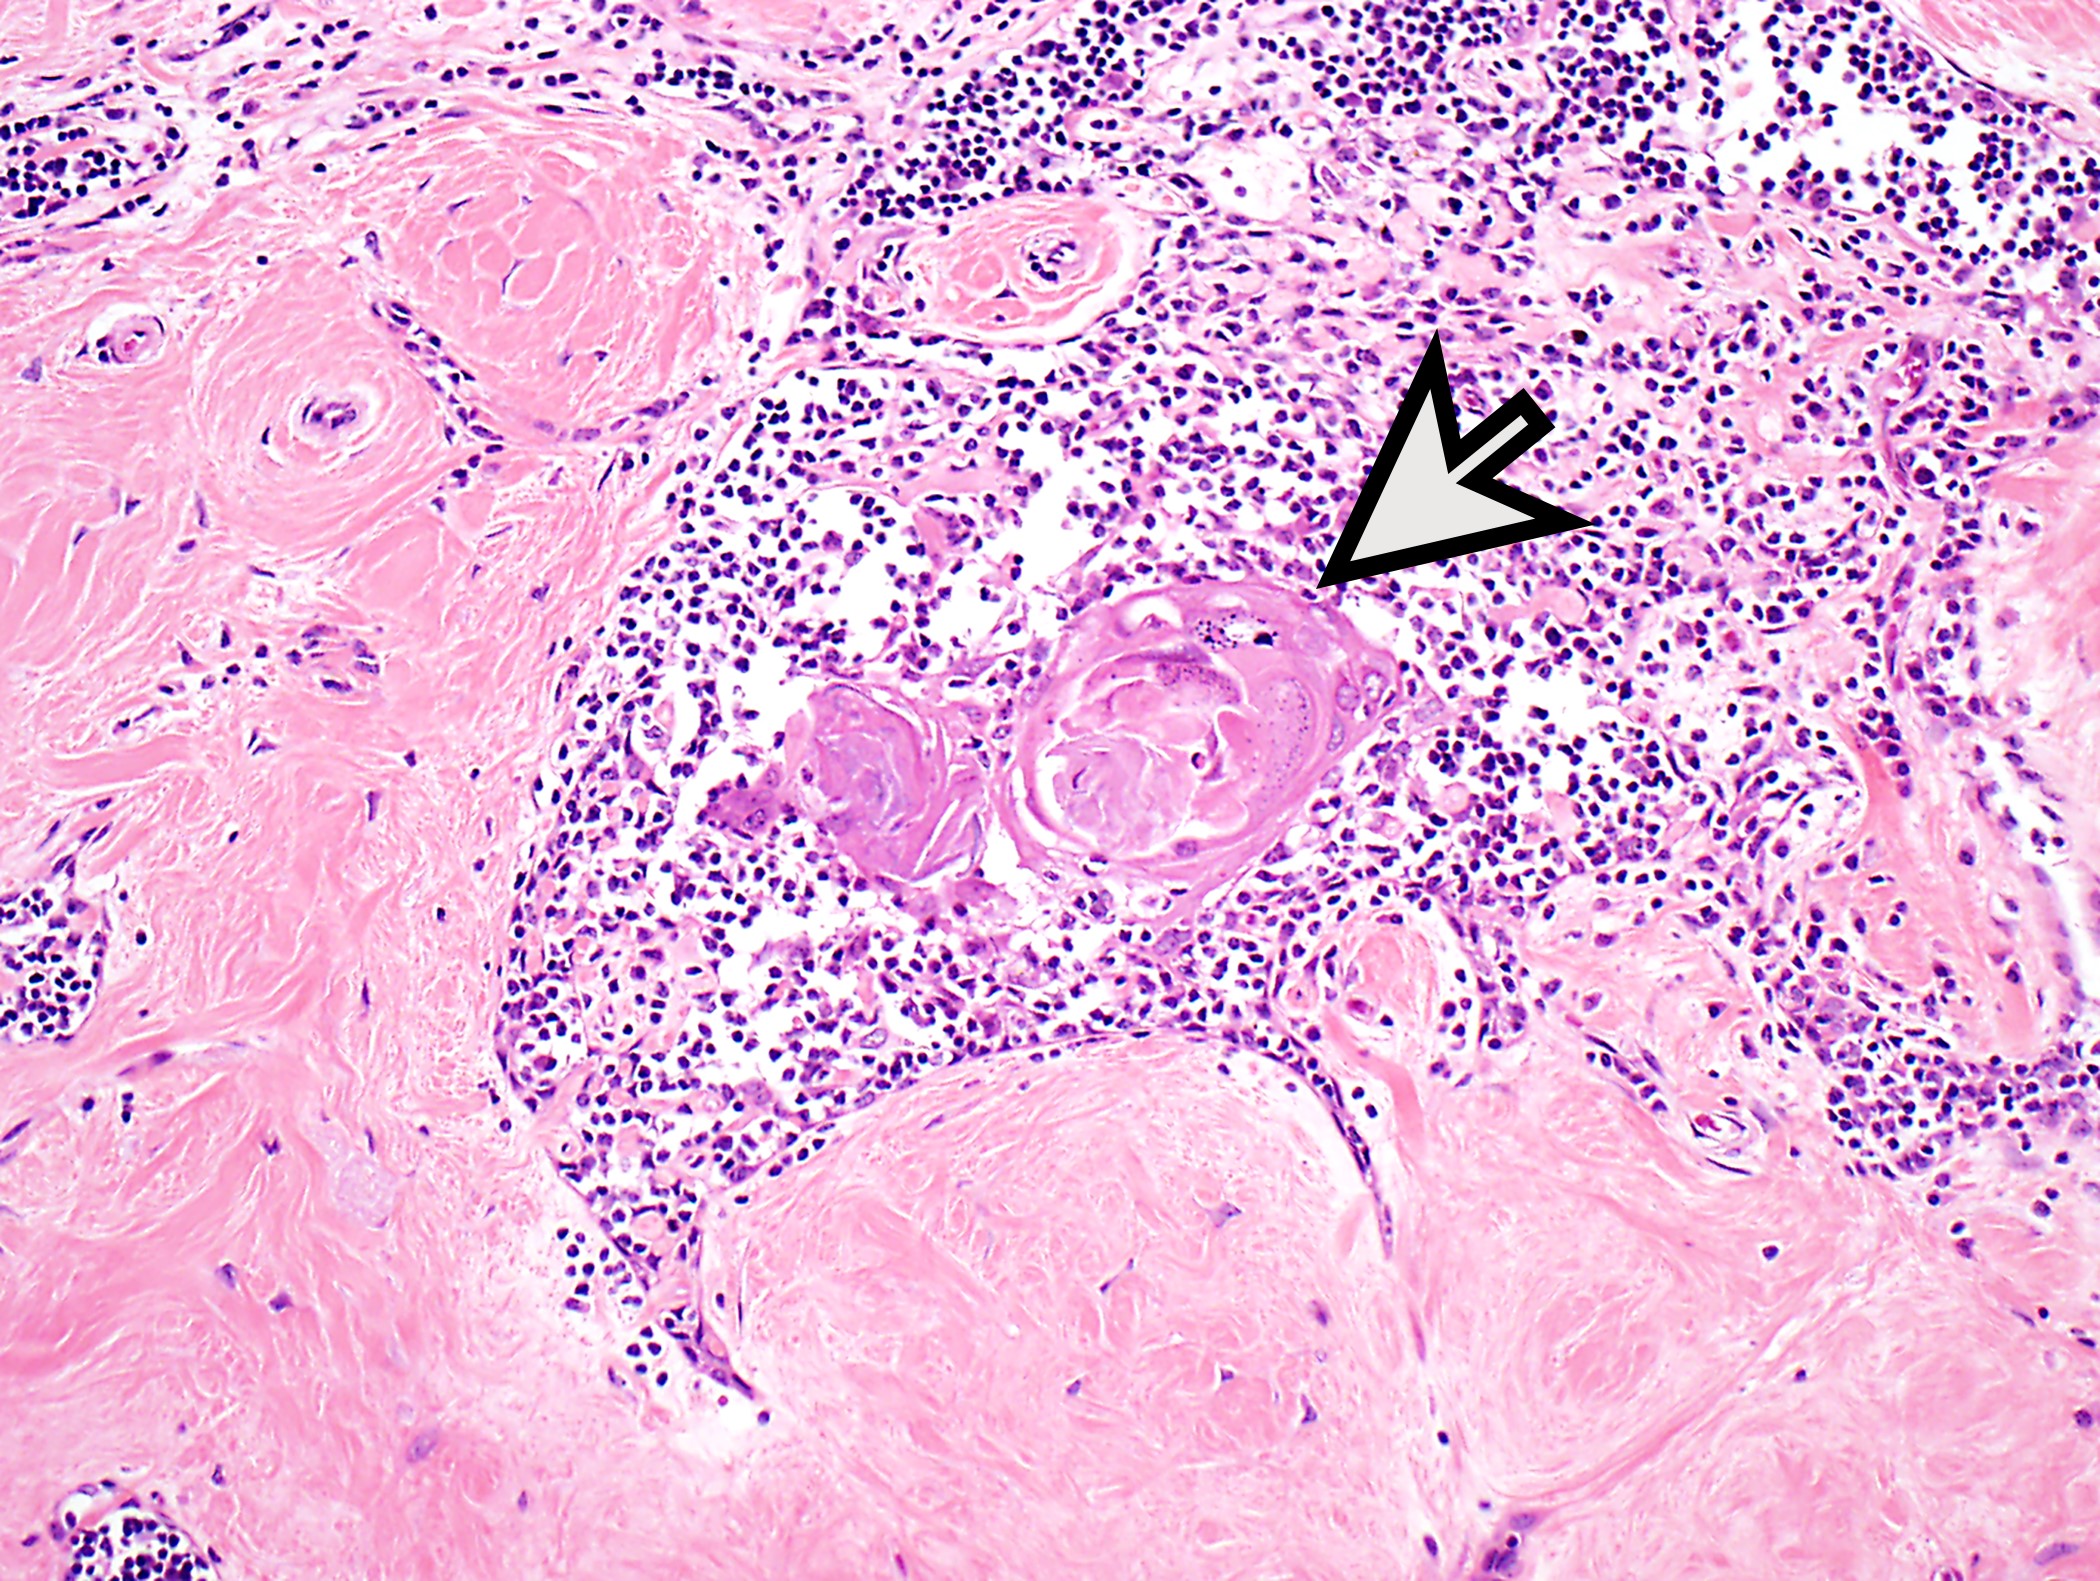 Thymoma with extensive sclerosis and ossification